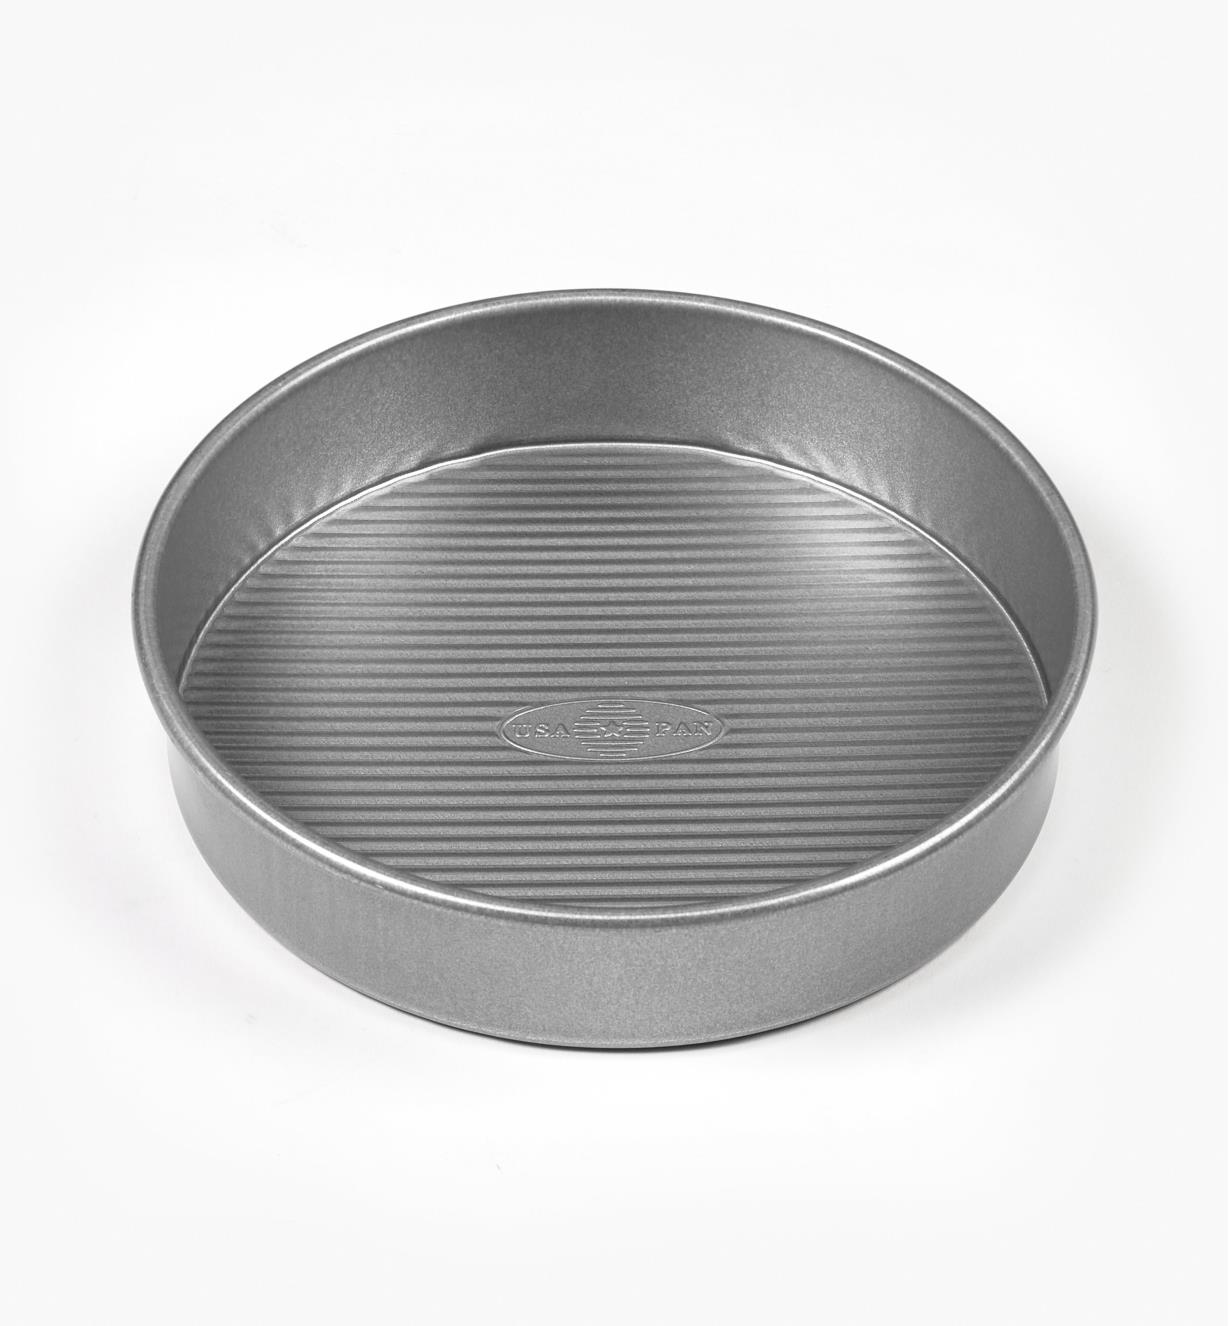 MASTER Chef Non-Stick Round Cake Pans, 8-in, 3-pc | Canadian Tire